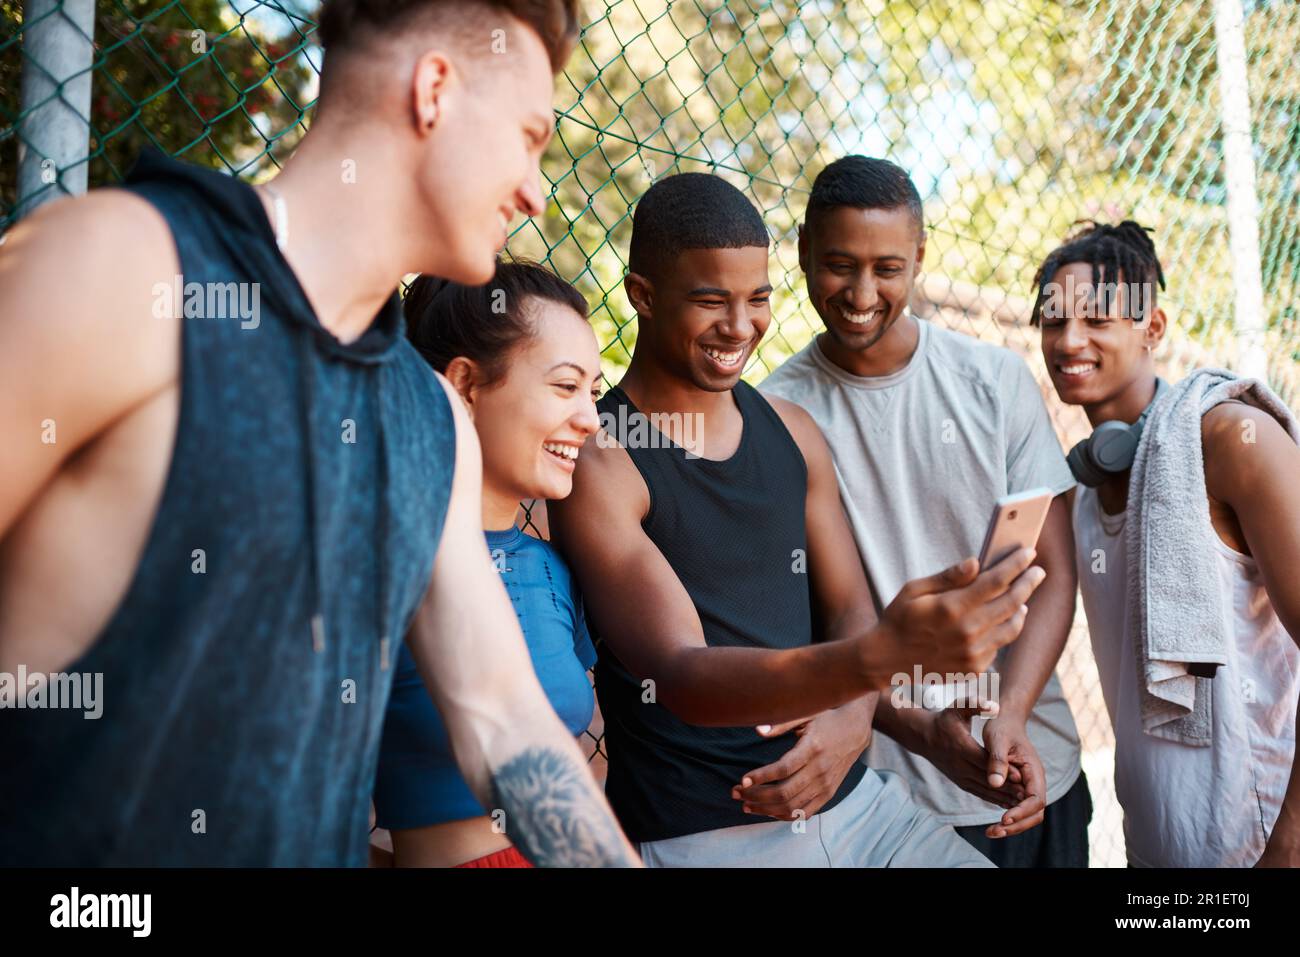 Told you this would be hilarious. a group of sporty young people looking at something on a cellphone while standing along a fence outdoors. Stock Photo